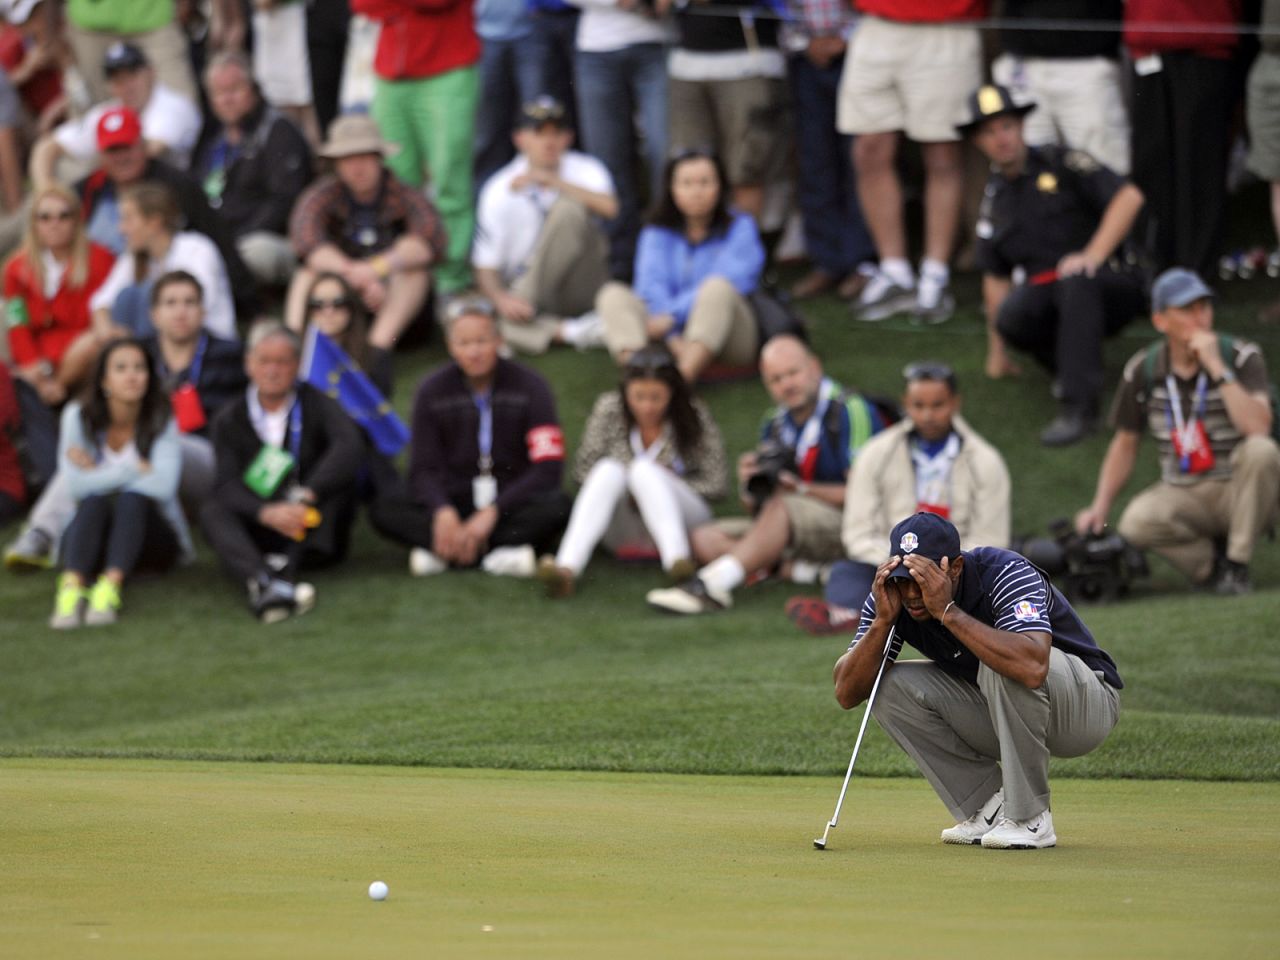 Tiger Woods of the United States scopes out a putt on the 17th hole during four-ball play Saturday.